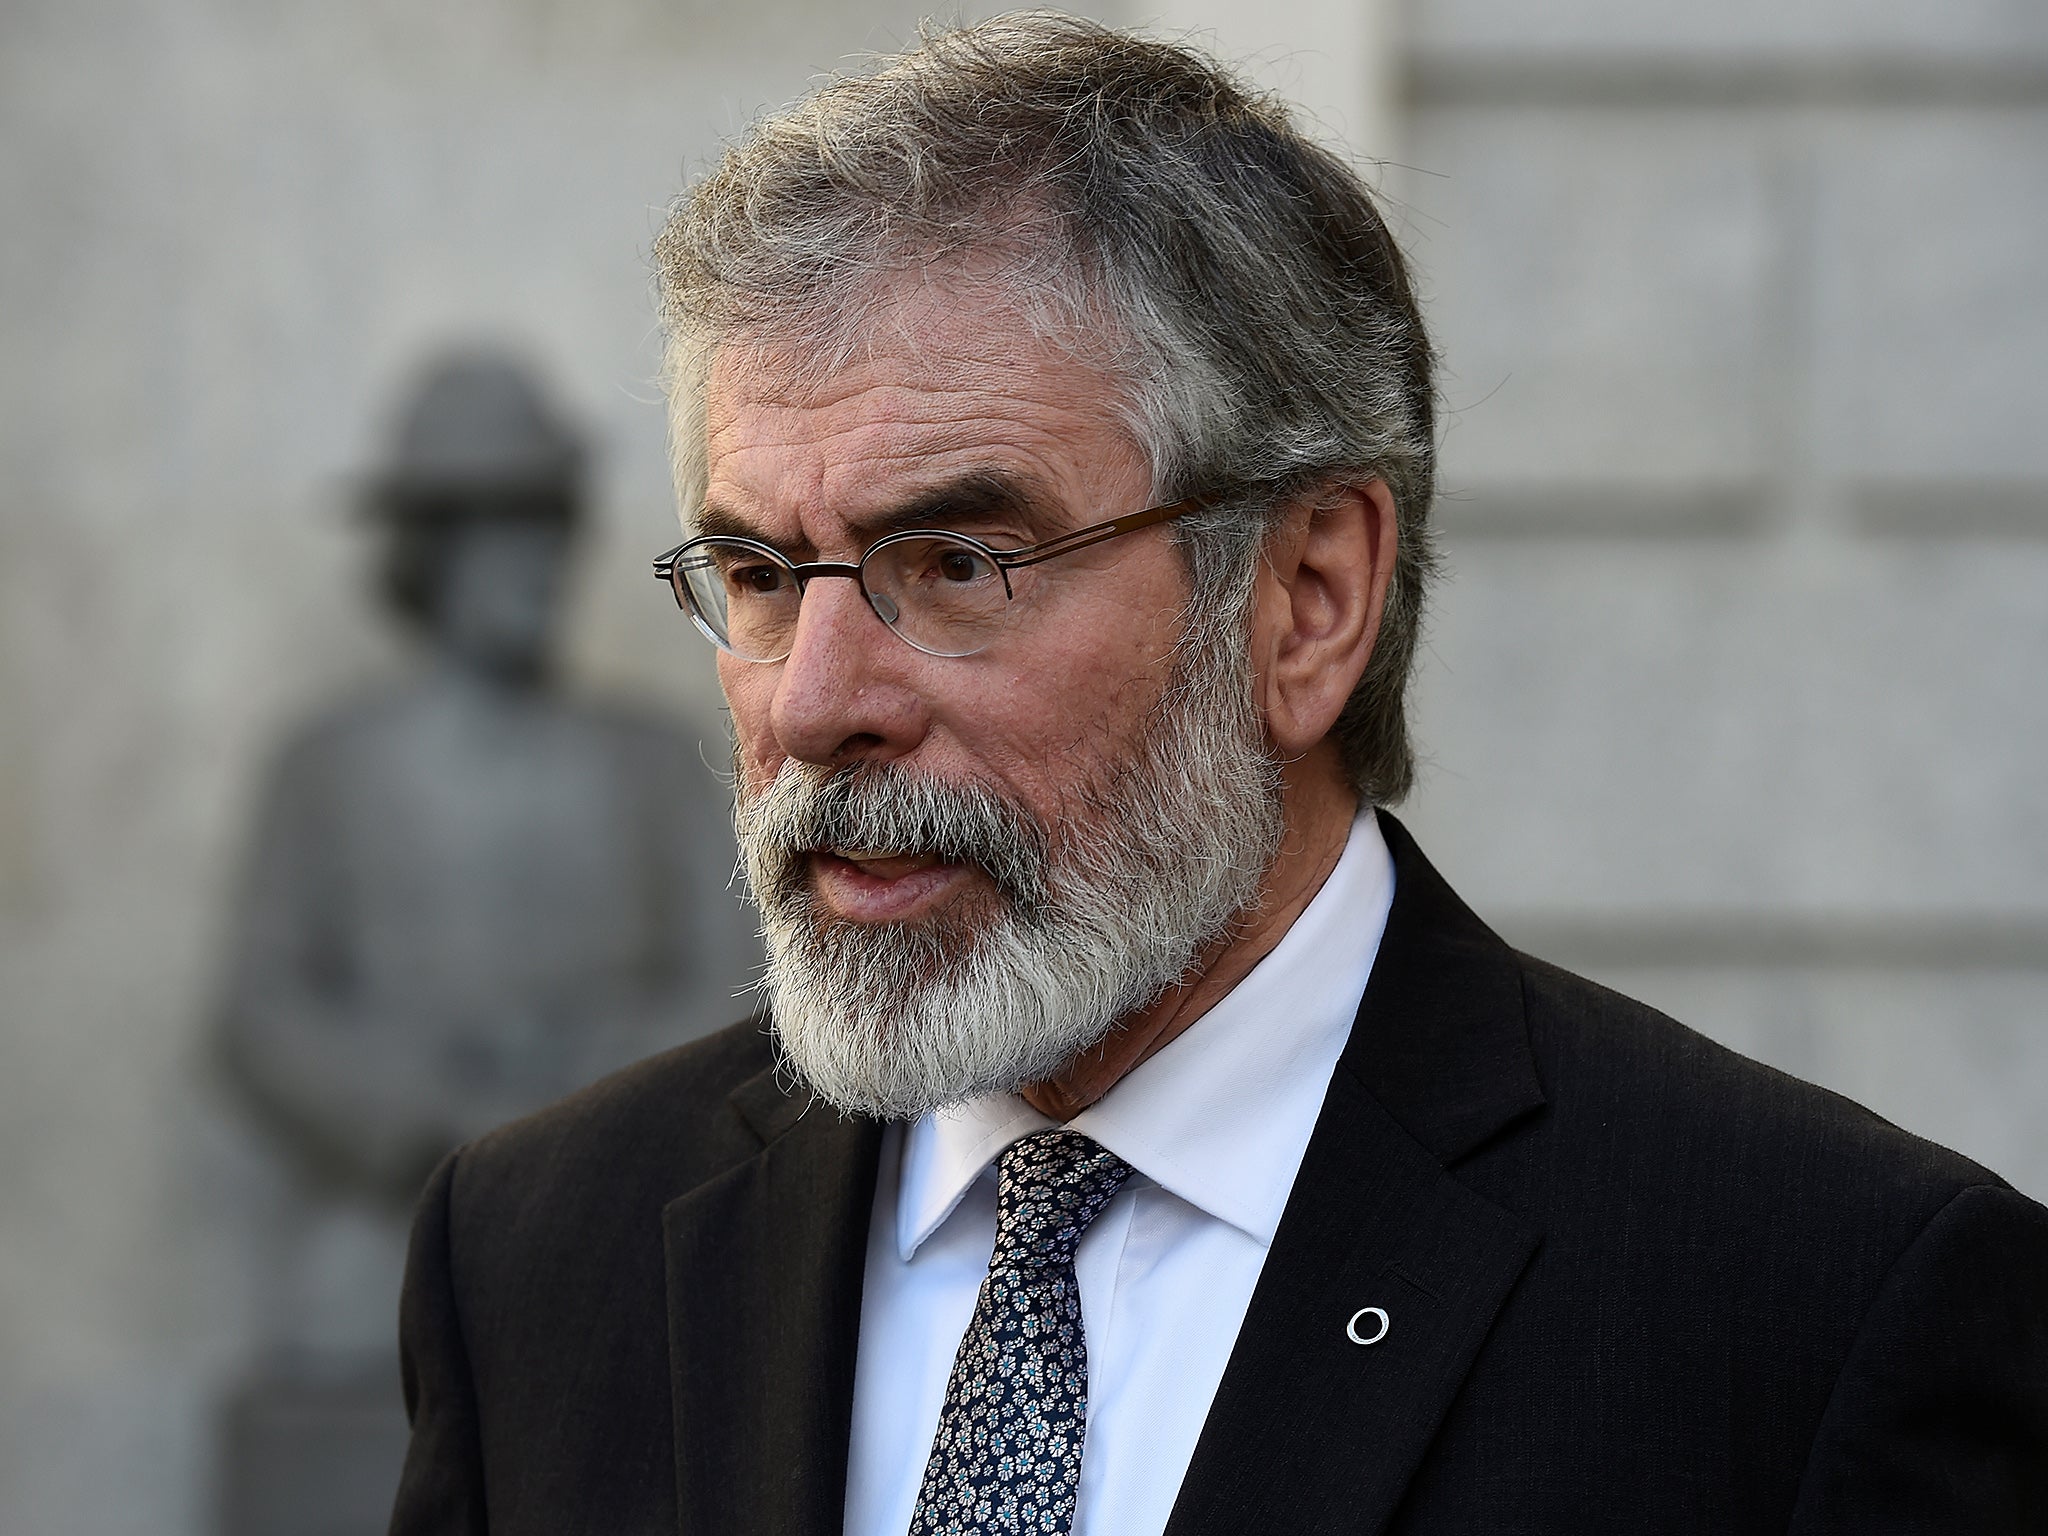 Gerry Adams's Sinn Fein and the DUP have been unable to form an executive in Nothern Ireland since elections earlier this year